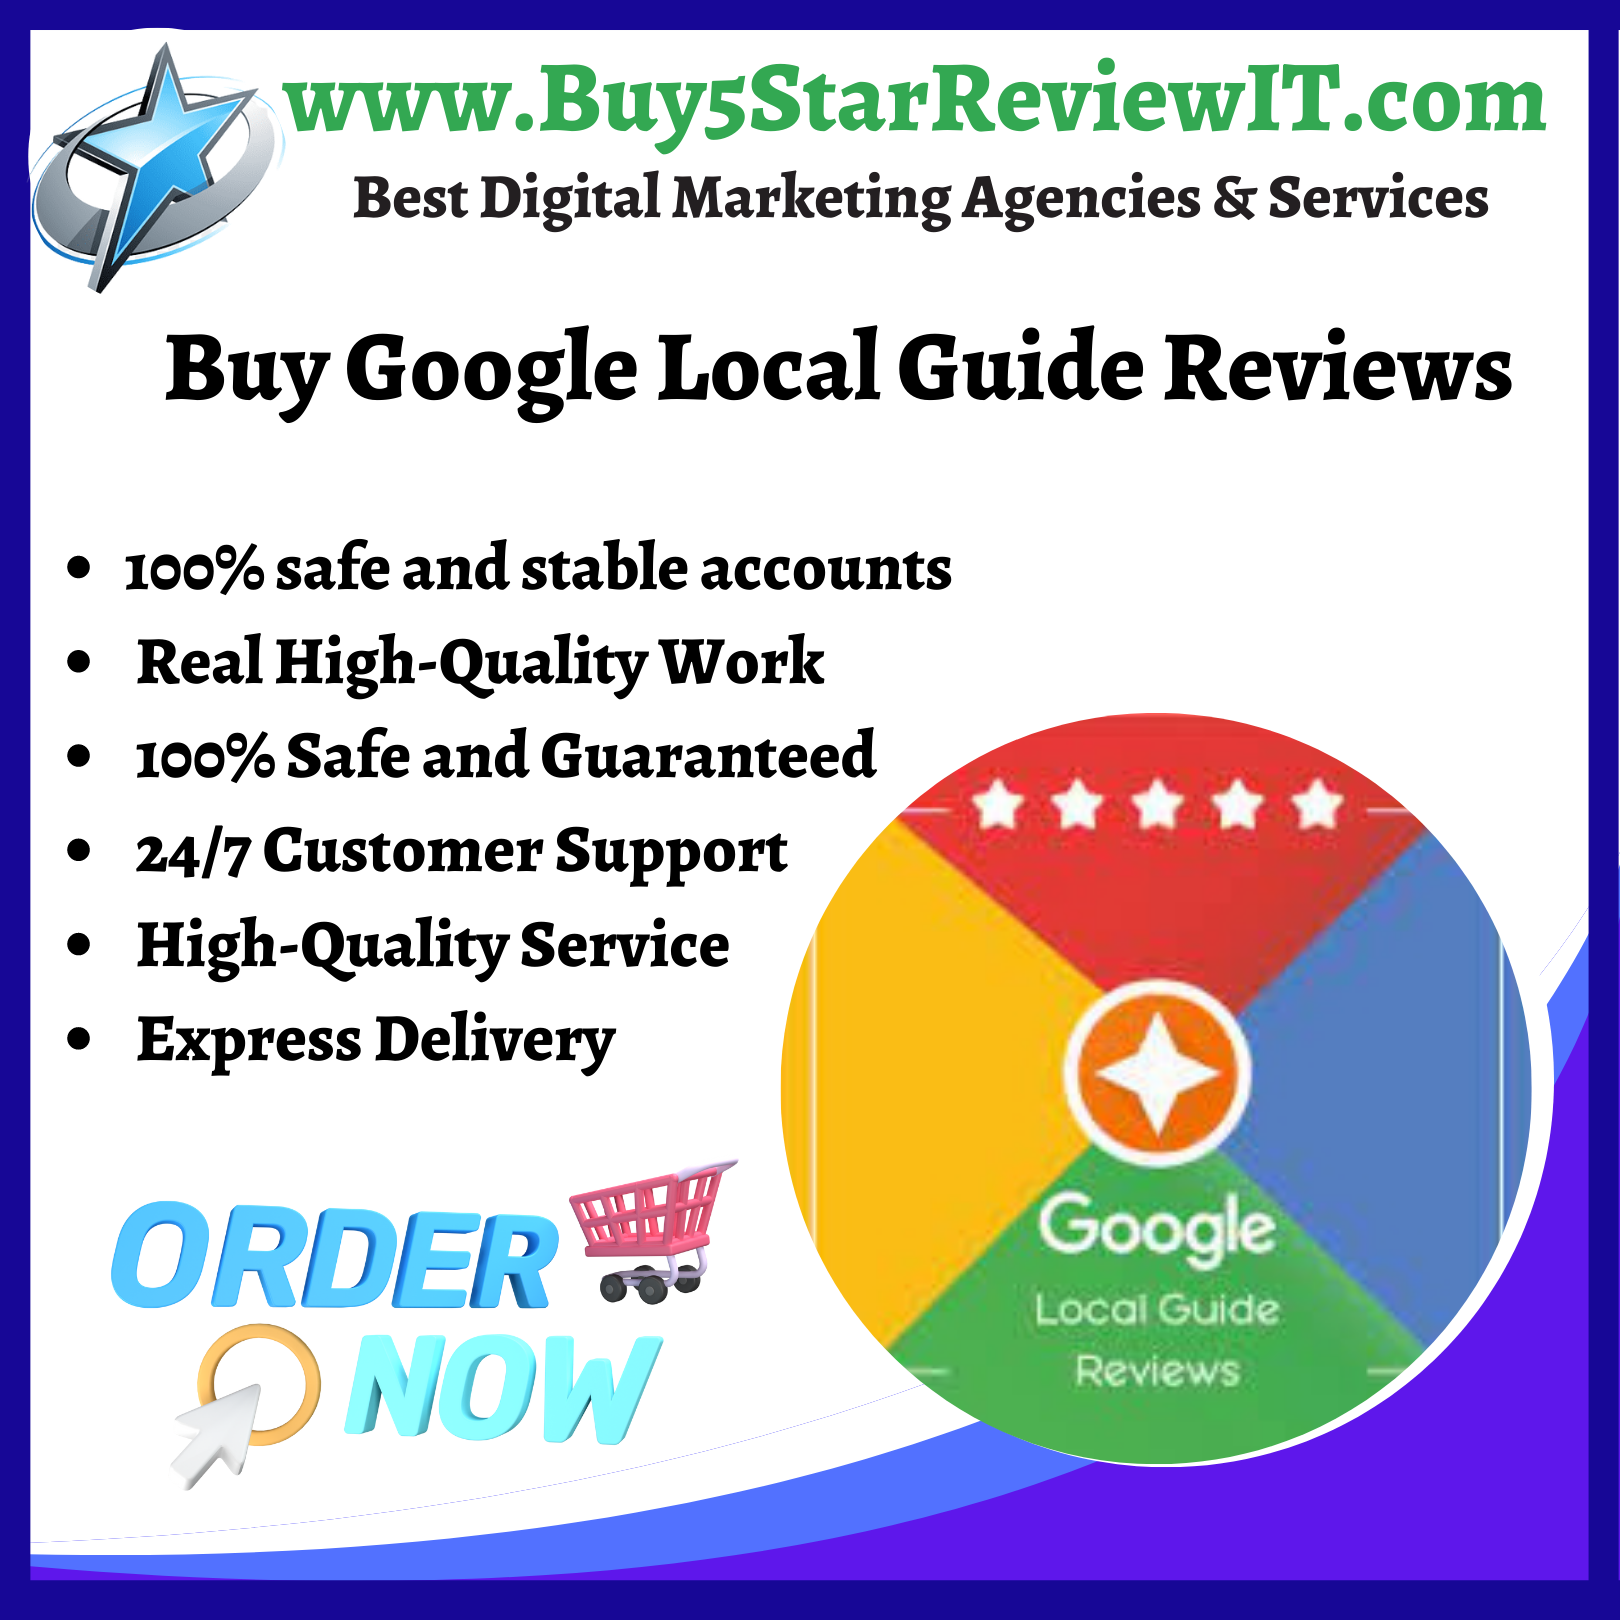 Buy Google Local Guide Reviews - Buy 5 Star Review IT